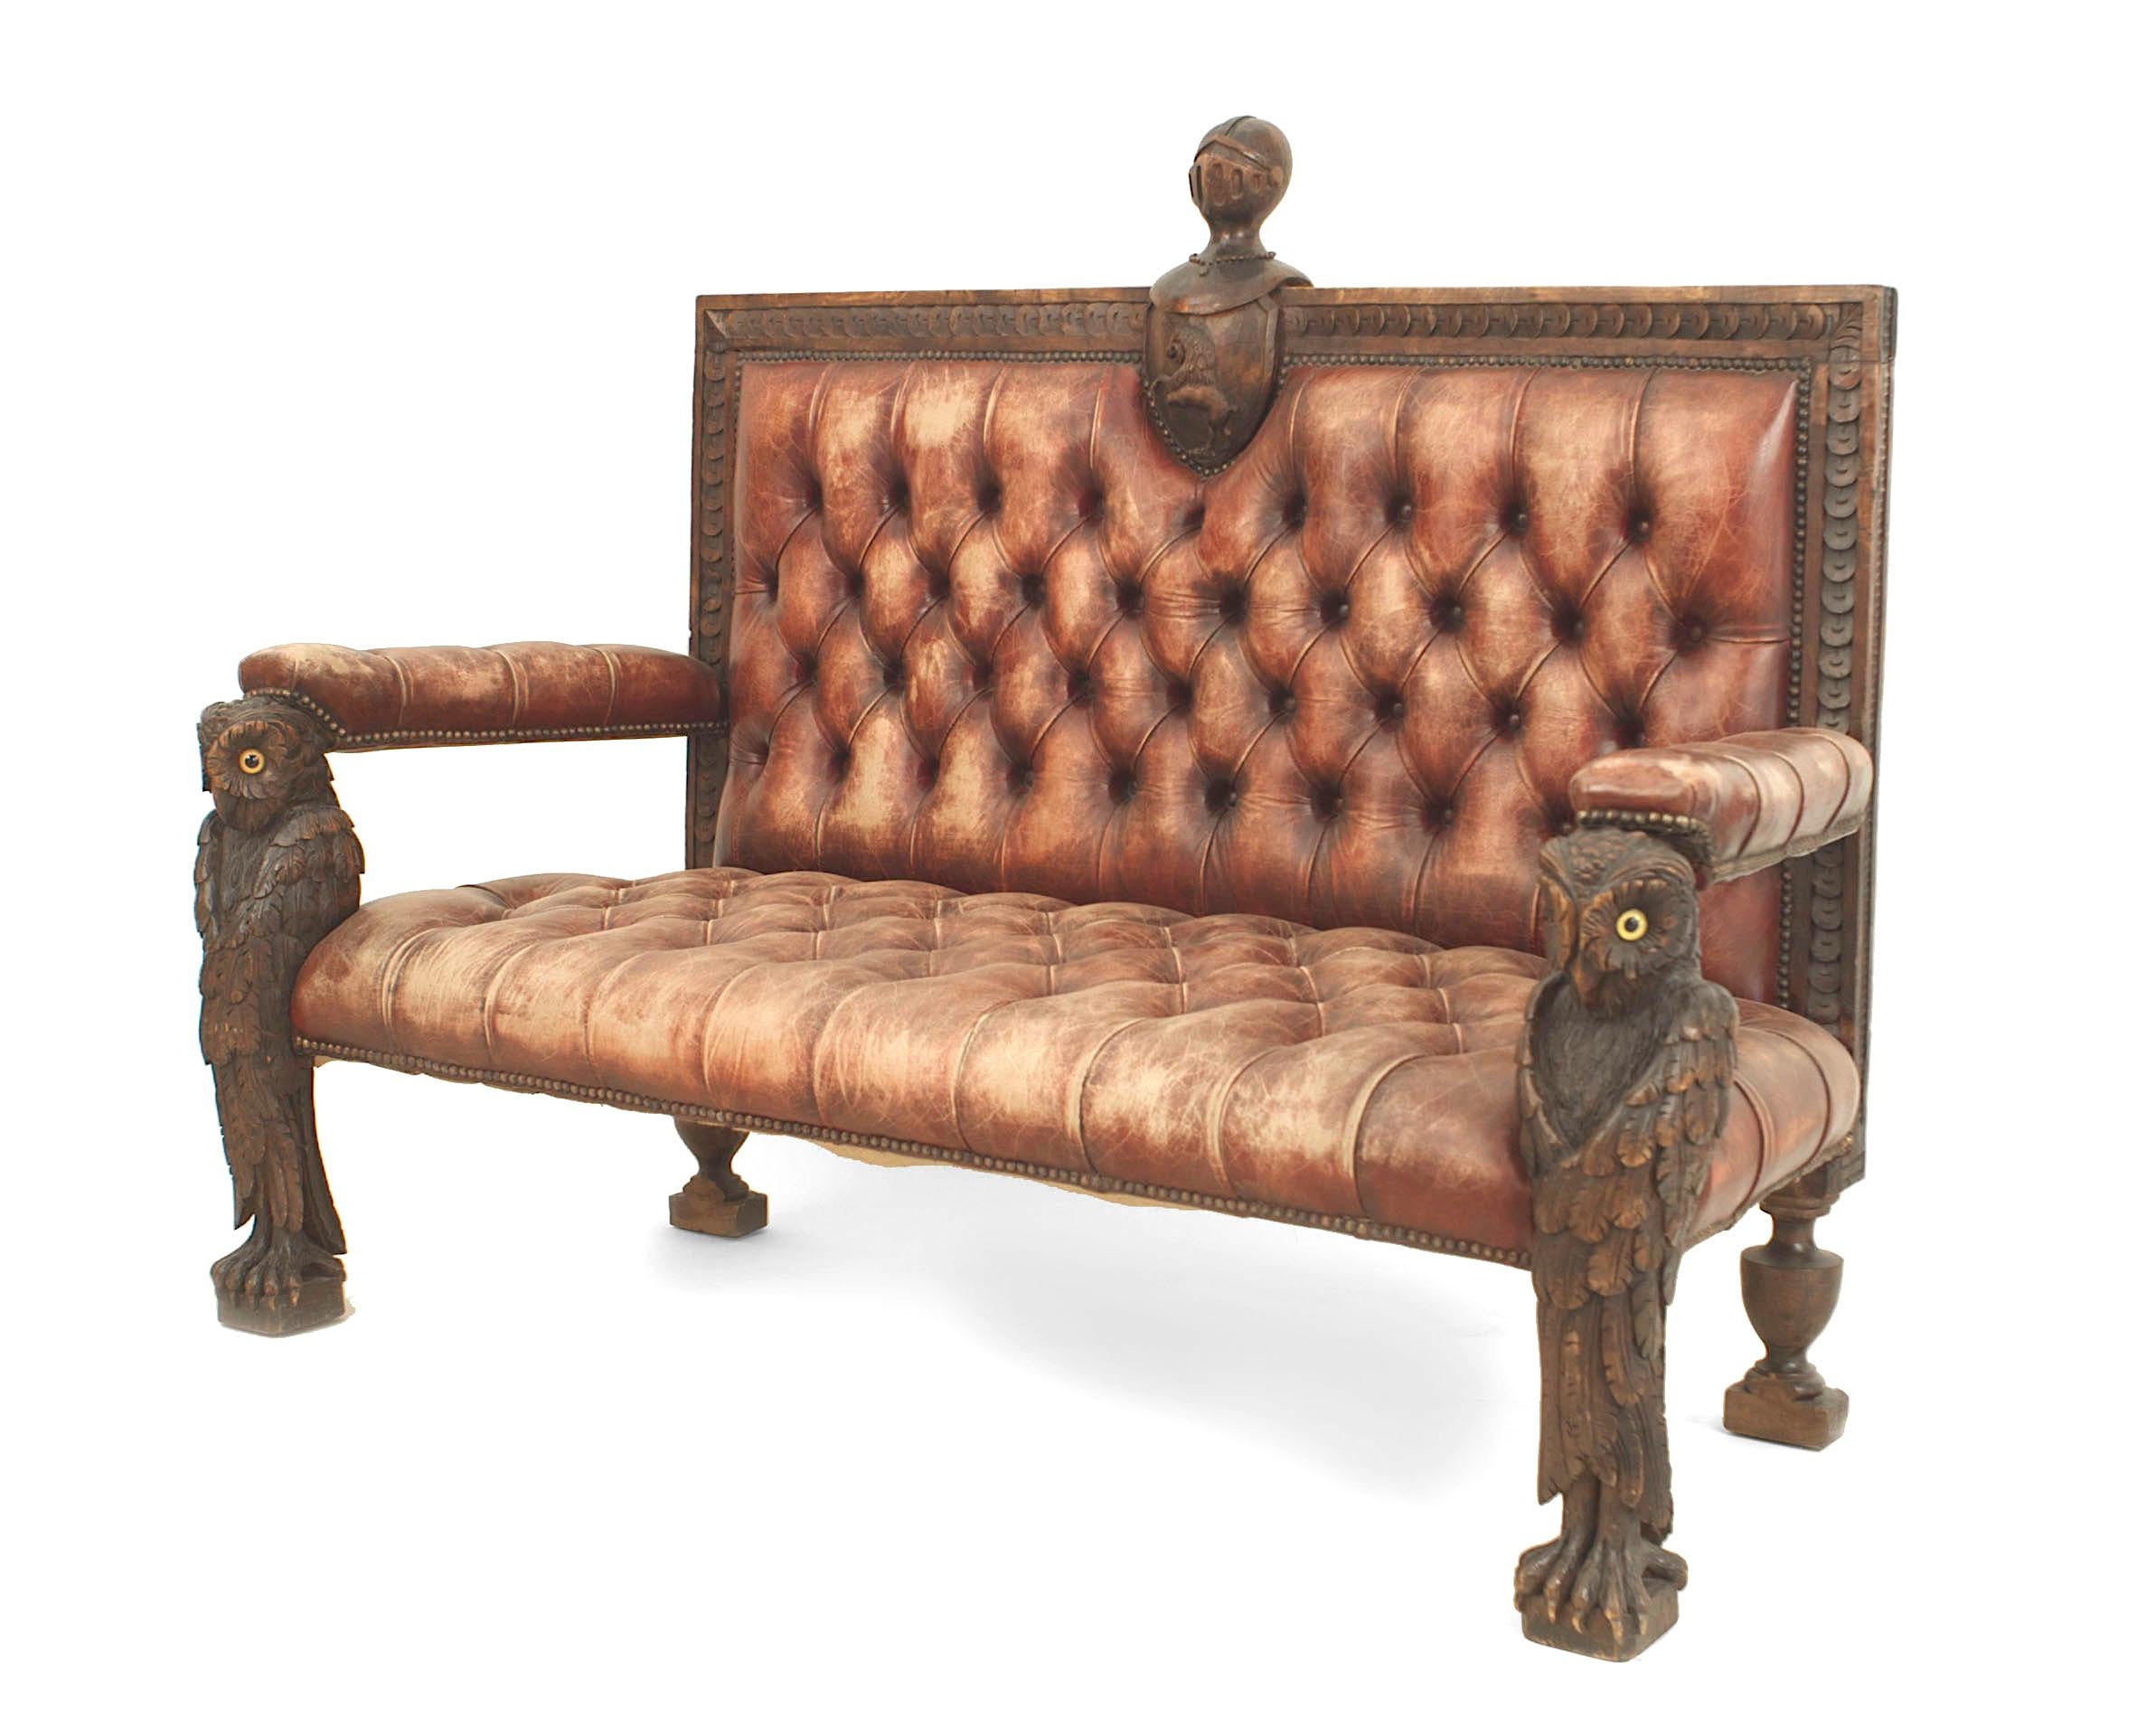 Rustic Continental (19th Cent) walnut carved loveseat with owl figural front legs and red tufted leather upholstery (matching Pair of armchairs: 057846)
